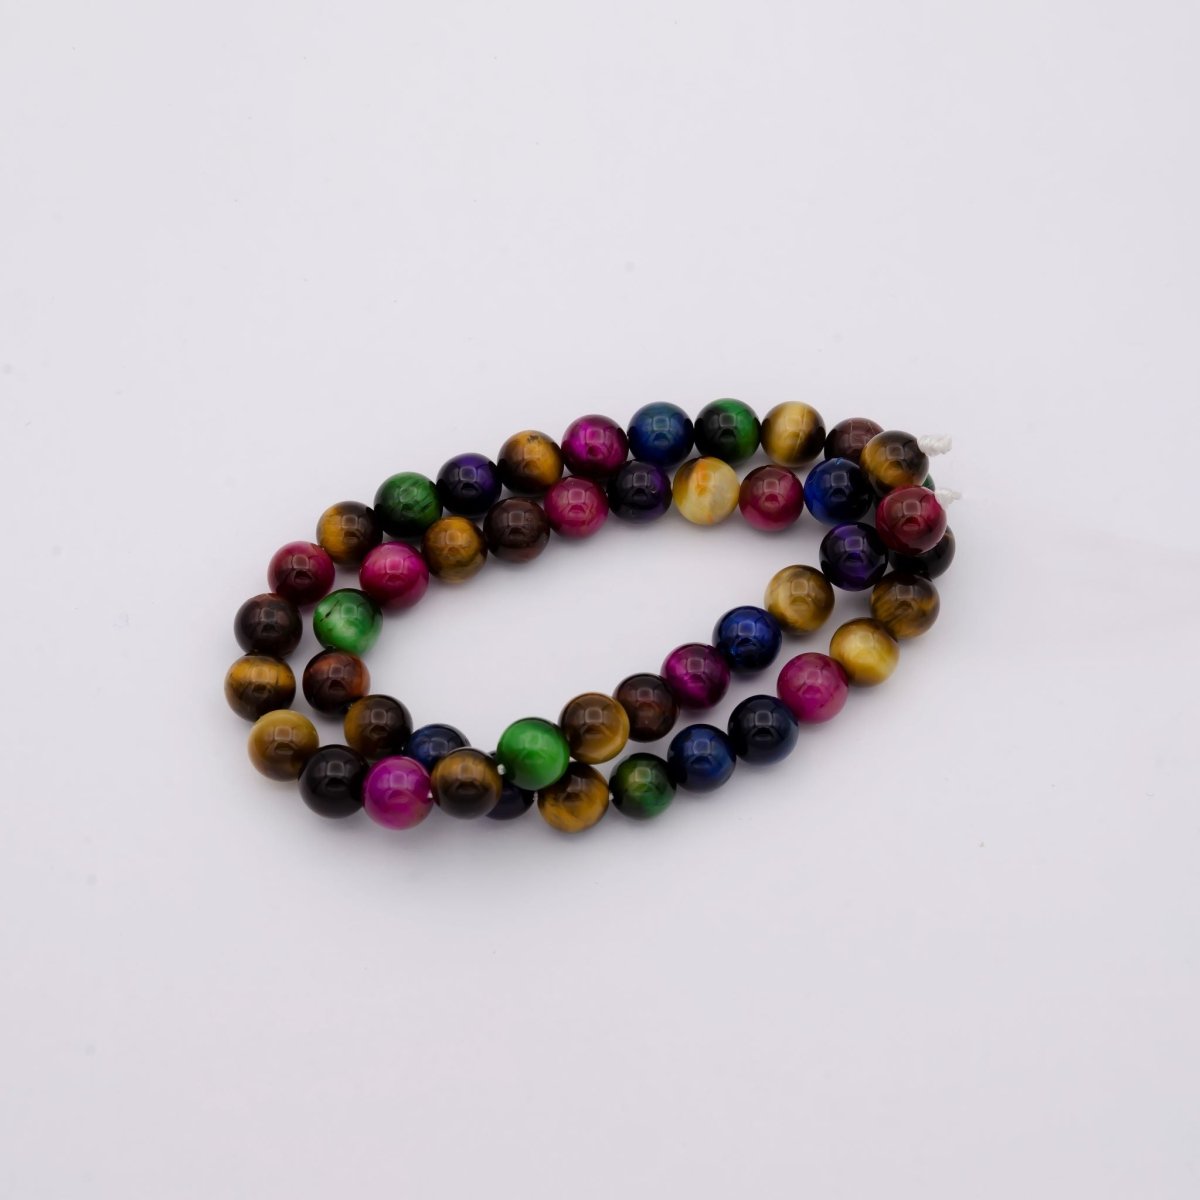 AAA Rainbow Multi Color Tiger's Eye 8mm 10mm Smooth Round Beads 15.5" Strand Wholesale Gemstone Beads - DLUXCA